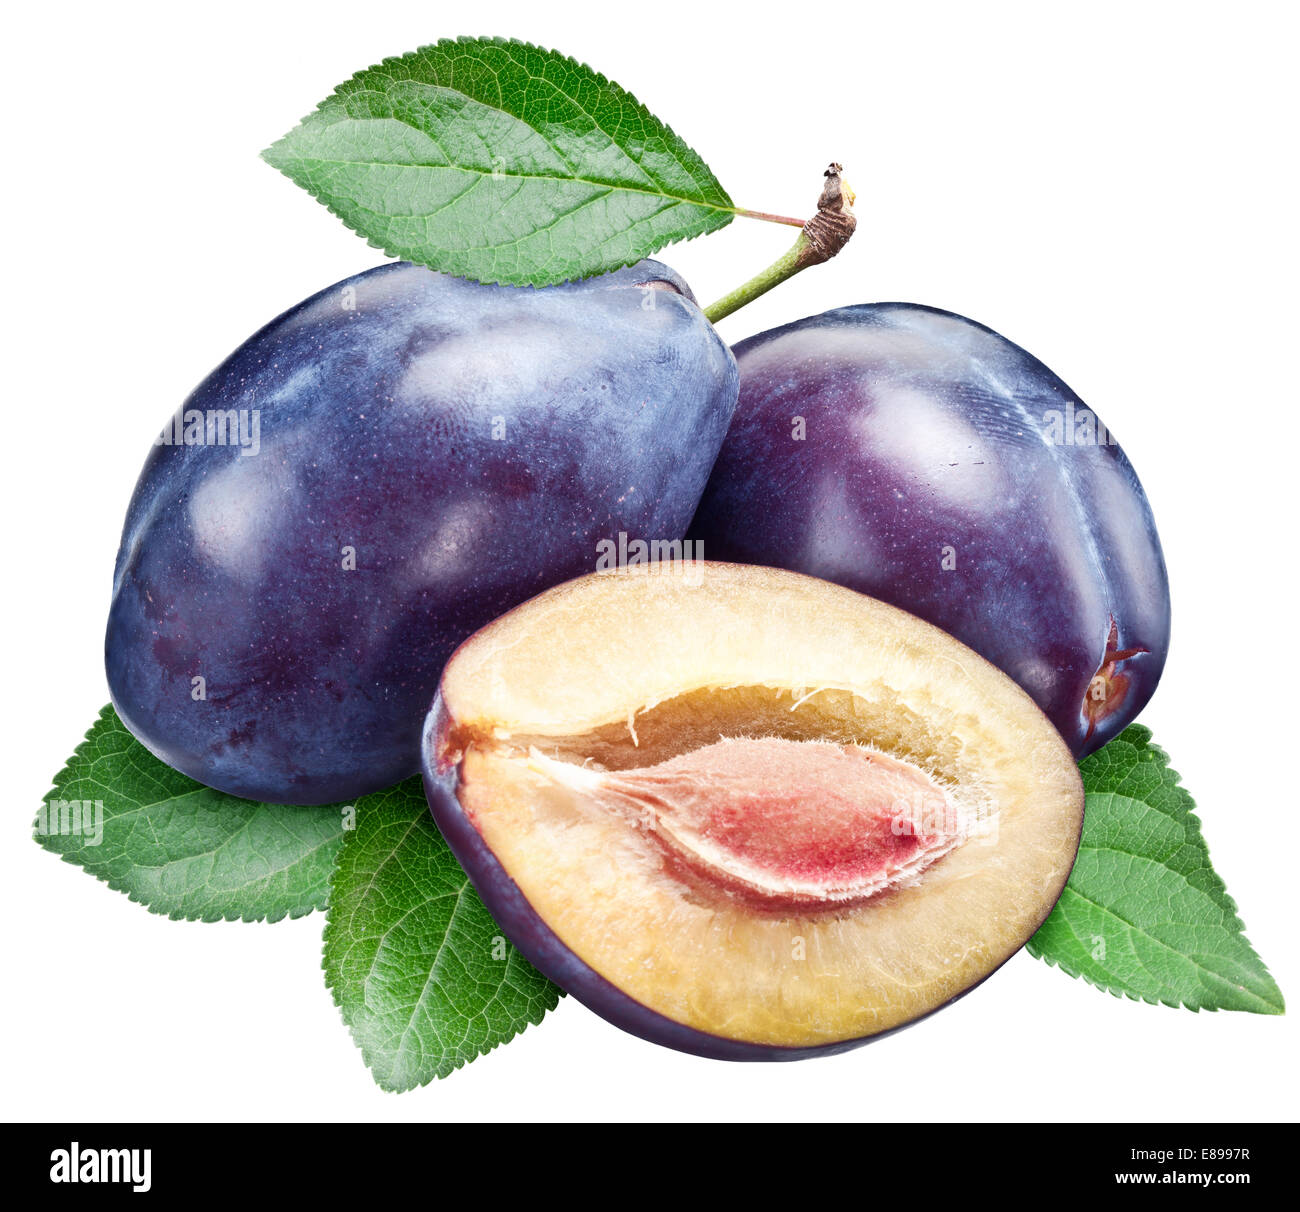 Three plums with leaf. File contains clipping paths. Stock Photo